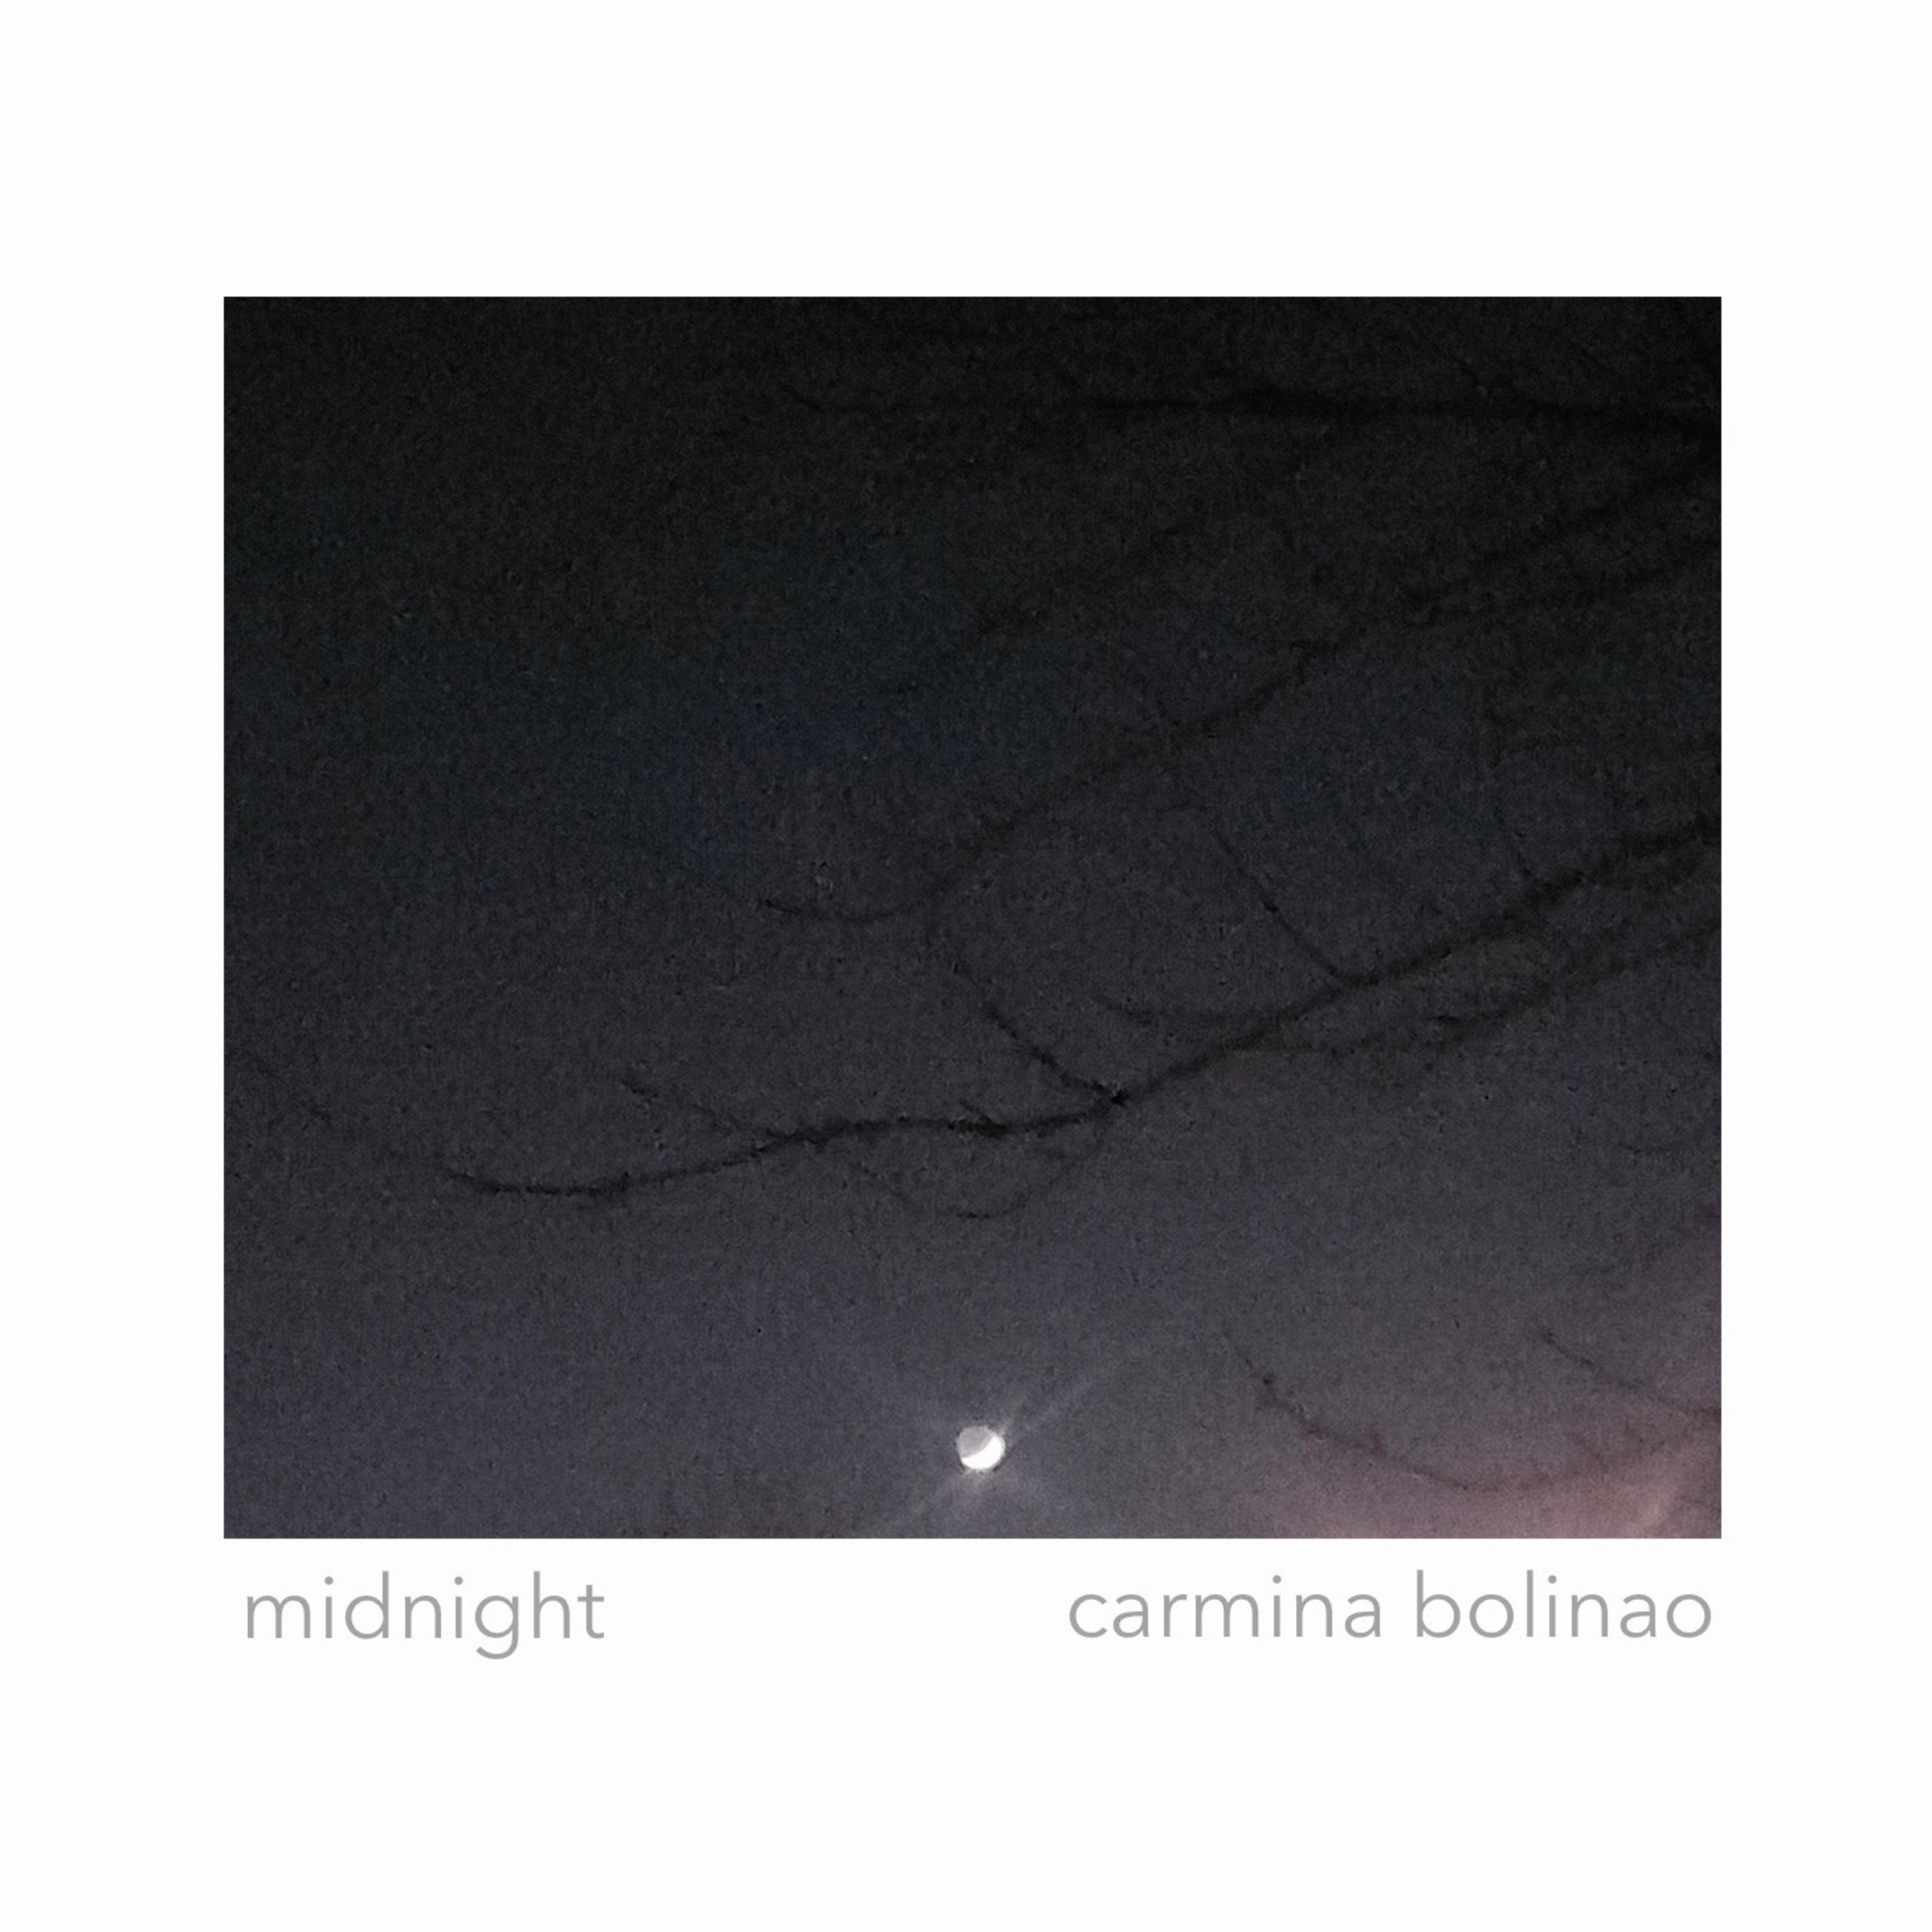 Album art for "Midnight." Photo of the silhouette of a branch at night with the moon in the background.